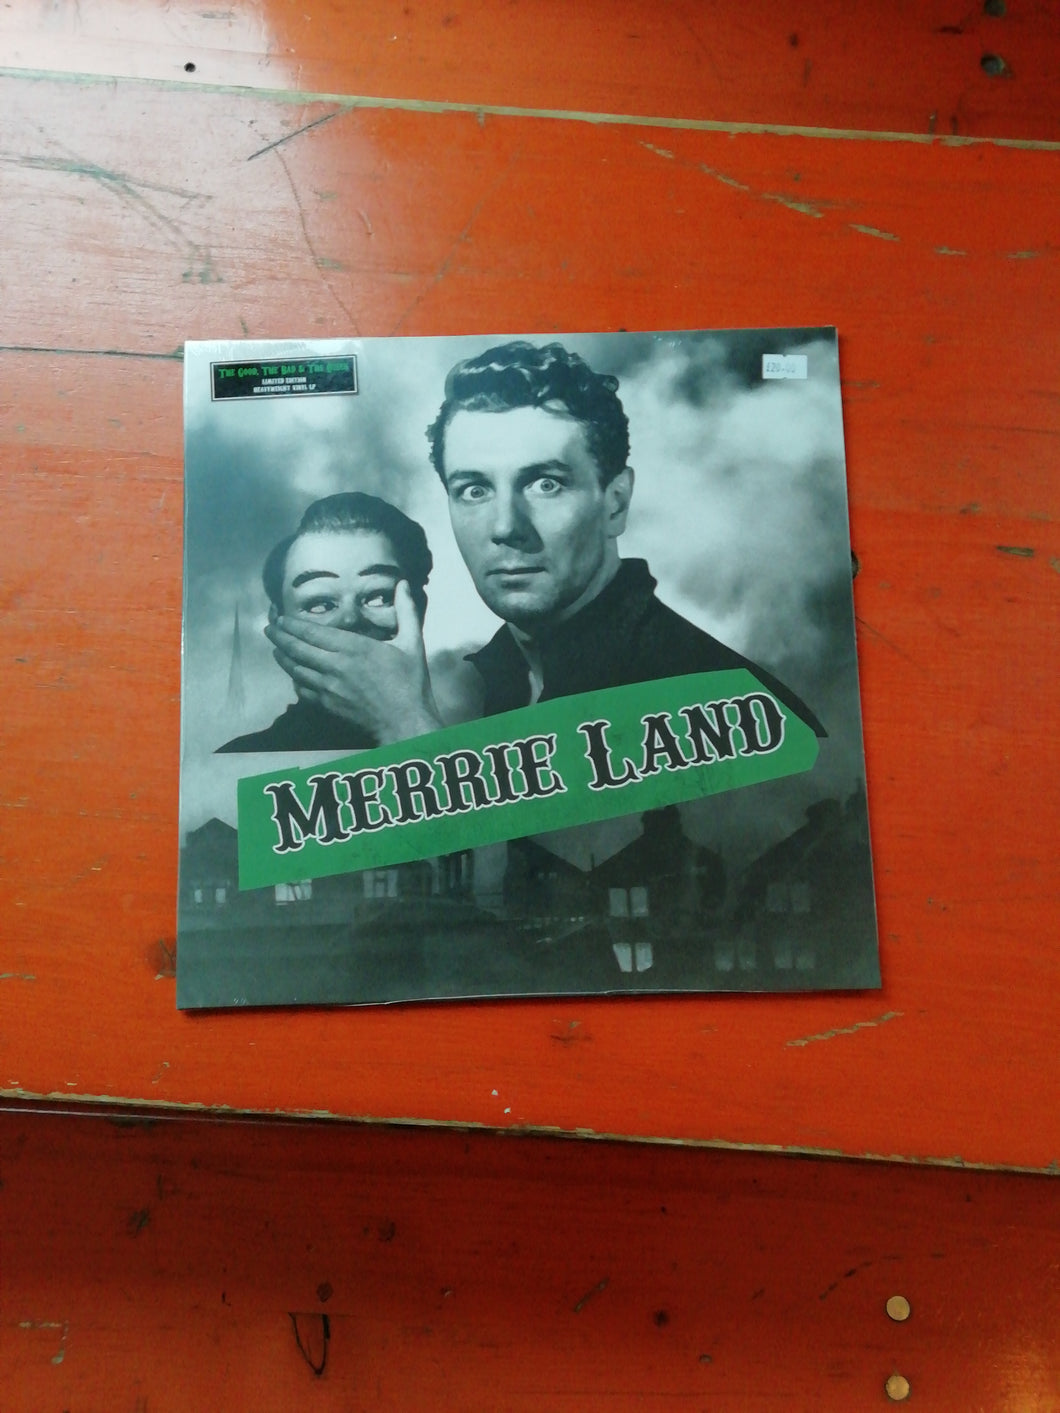 The Good The Bad and The Queen - Merrie Land